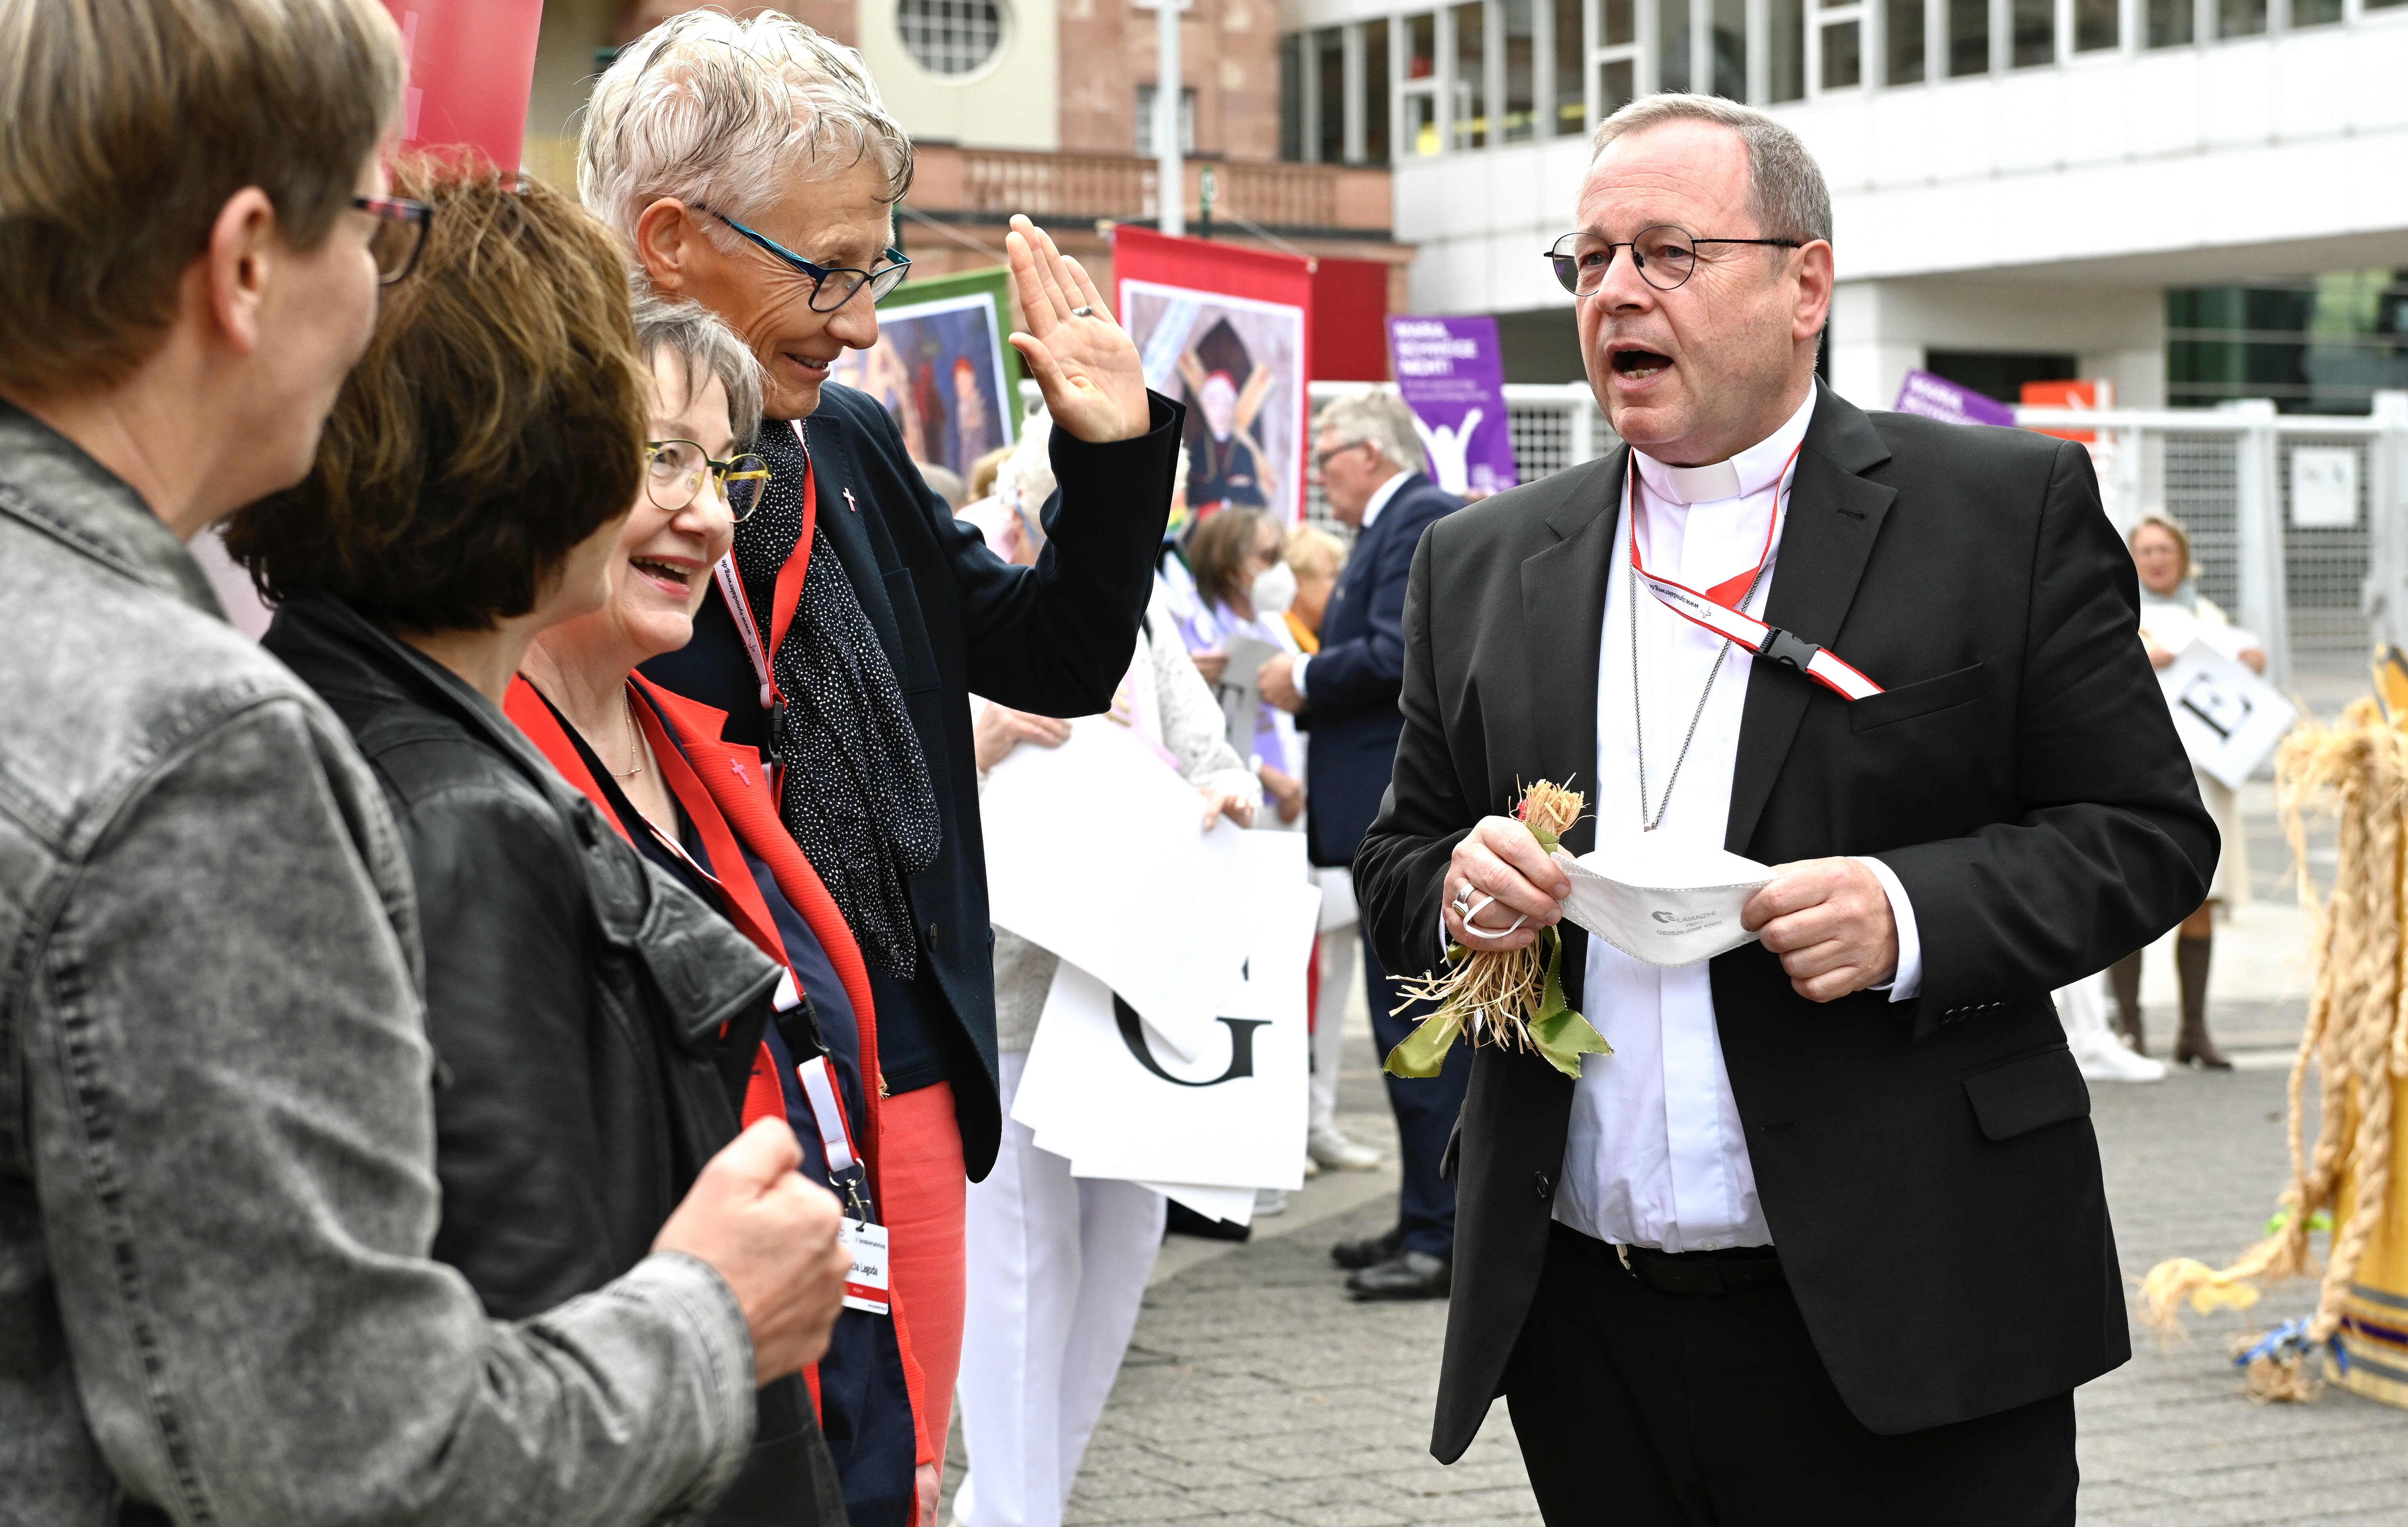 Bishop Georg Bätzing, president of the German bishops' conference, talks with protesters from Maria 2.0 and We Are Church outside the second Synodal Assembly in Frankfurt, Germany, Sept. 30, 2021. (CNS photo/Julia Steinbrecht, KNA)